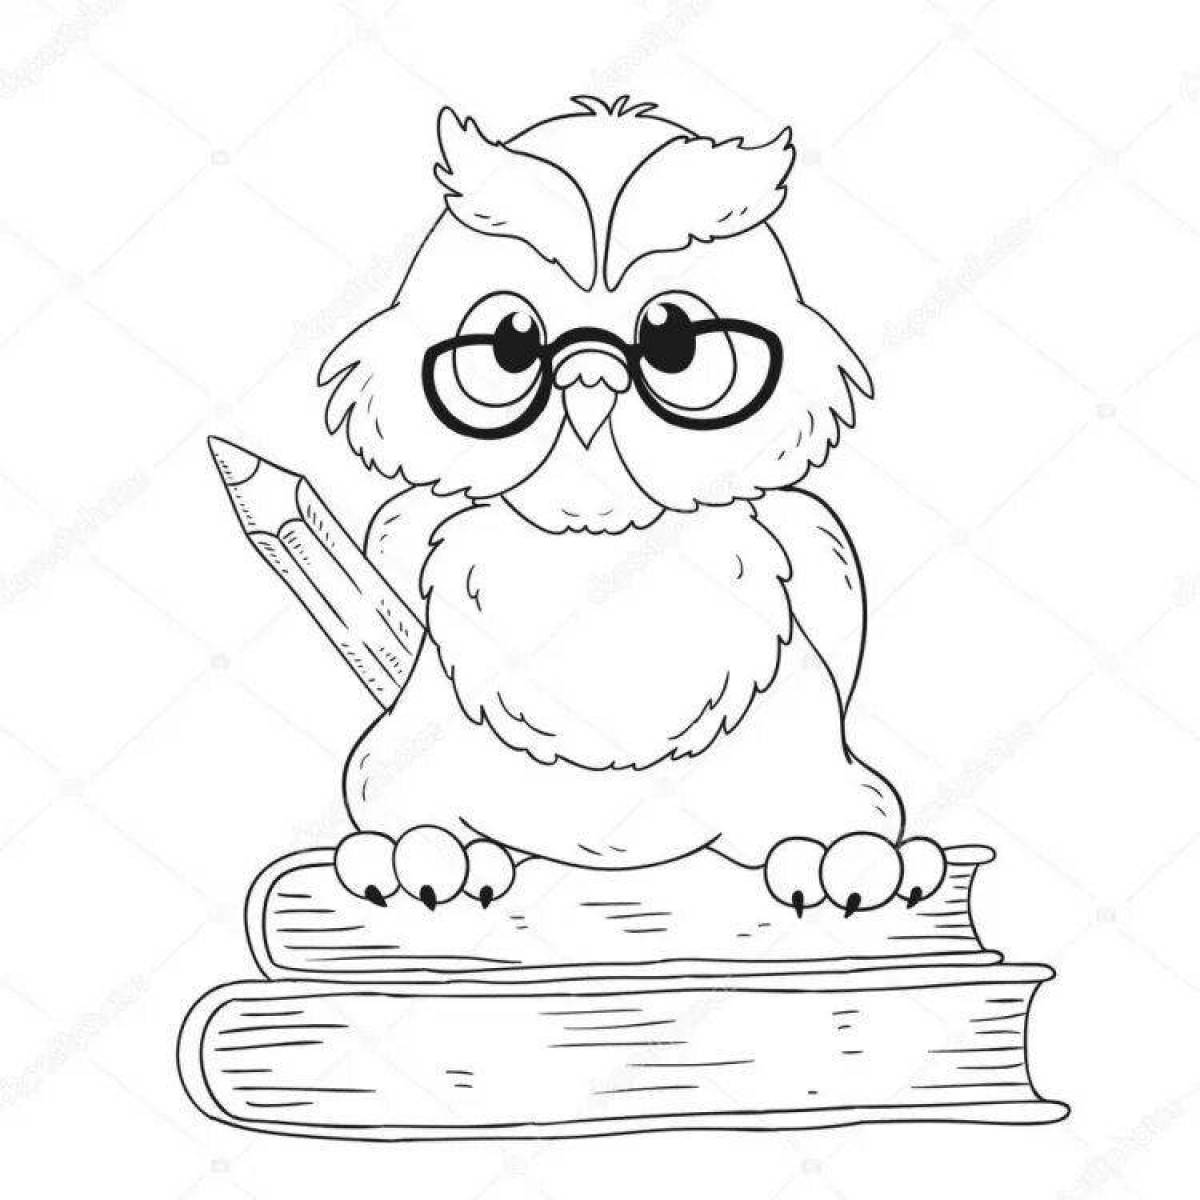 Wise owl coloring pages with feathers